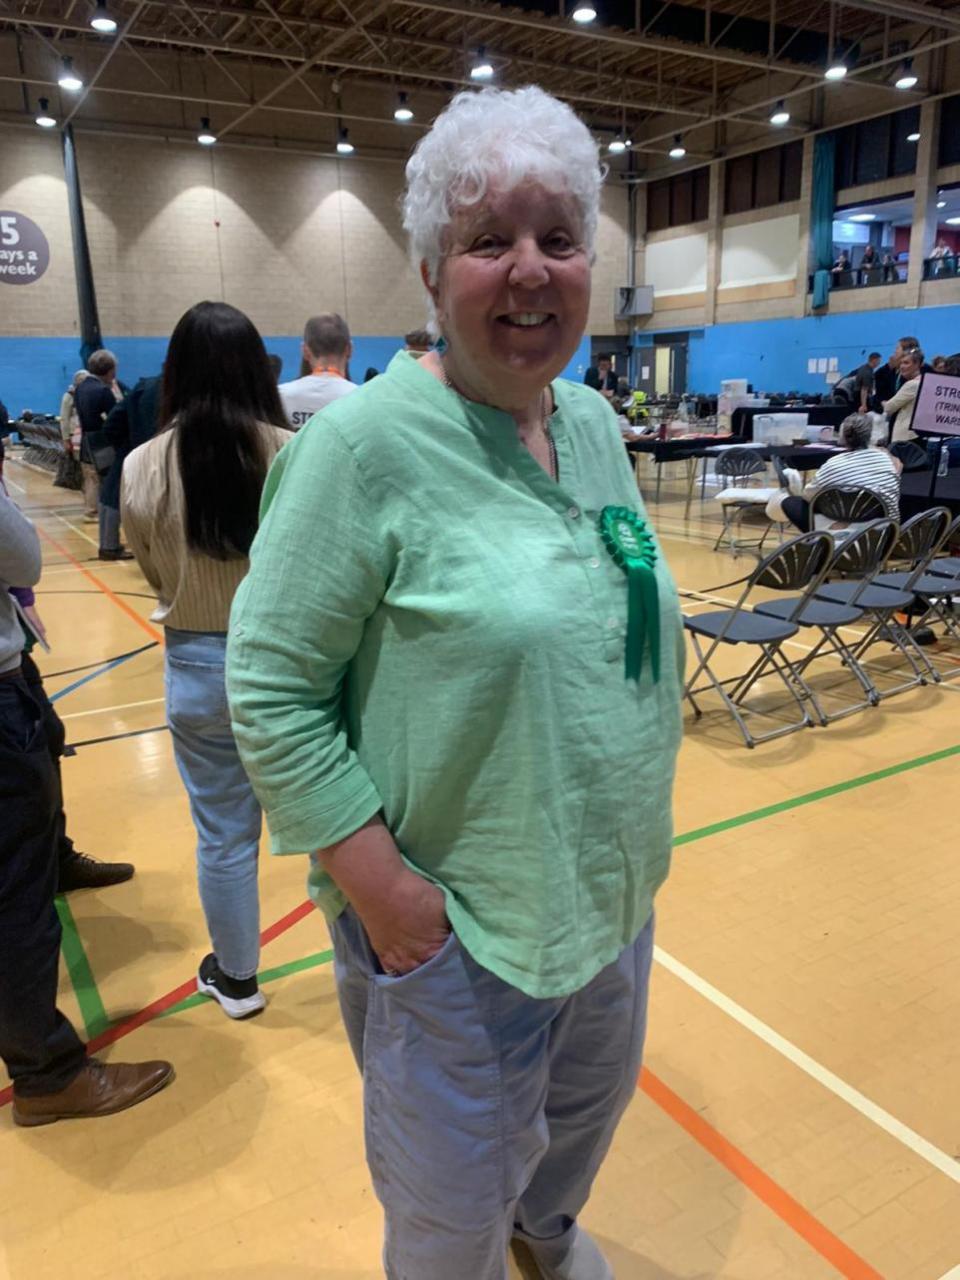 Stroud News and Journal: Kate Kay has been elected as Green Party councillor for Nailsworth and Horsley on Stroud District Council - the former seat of her late husband Norman 